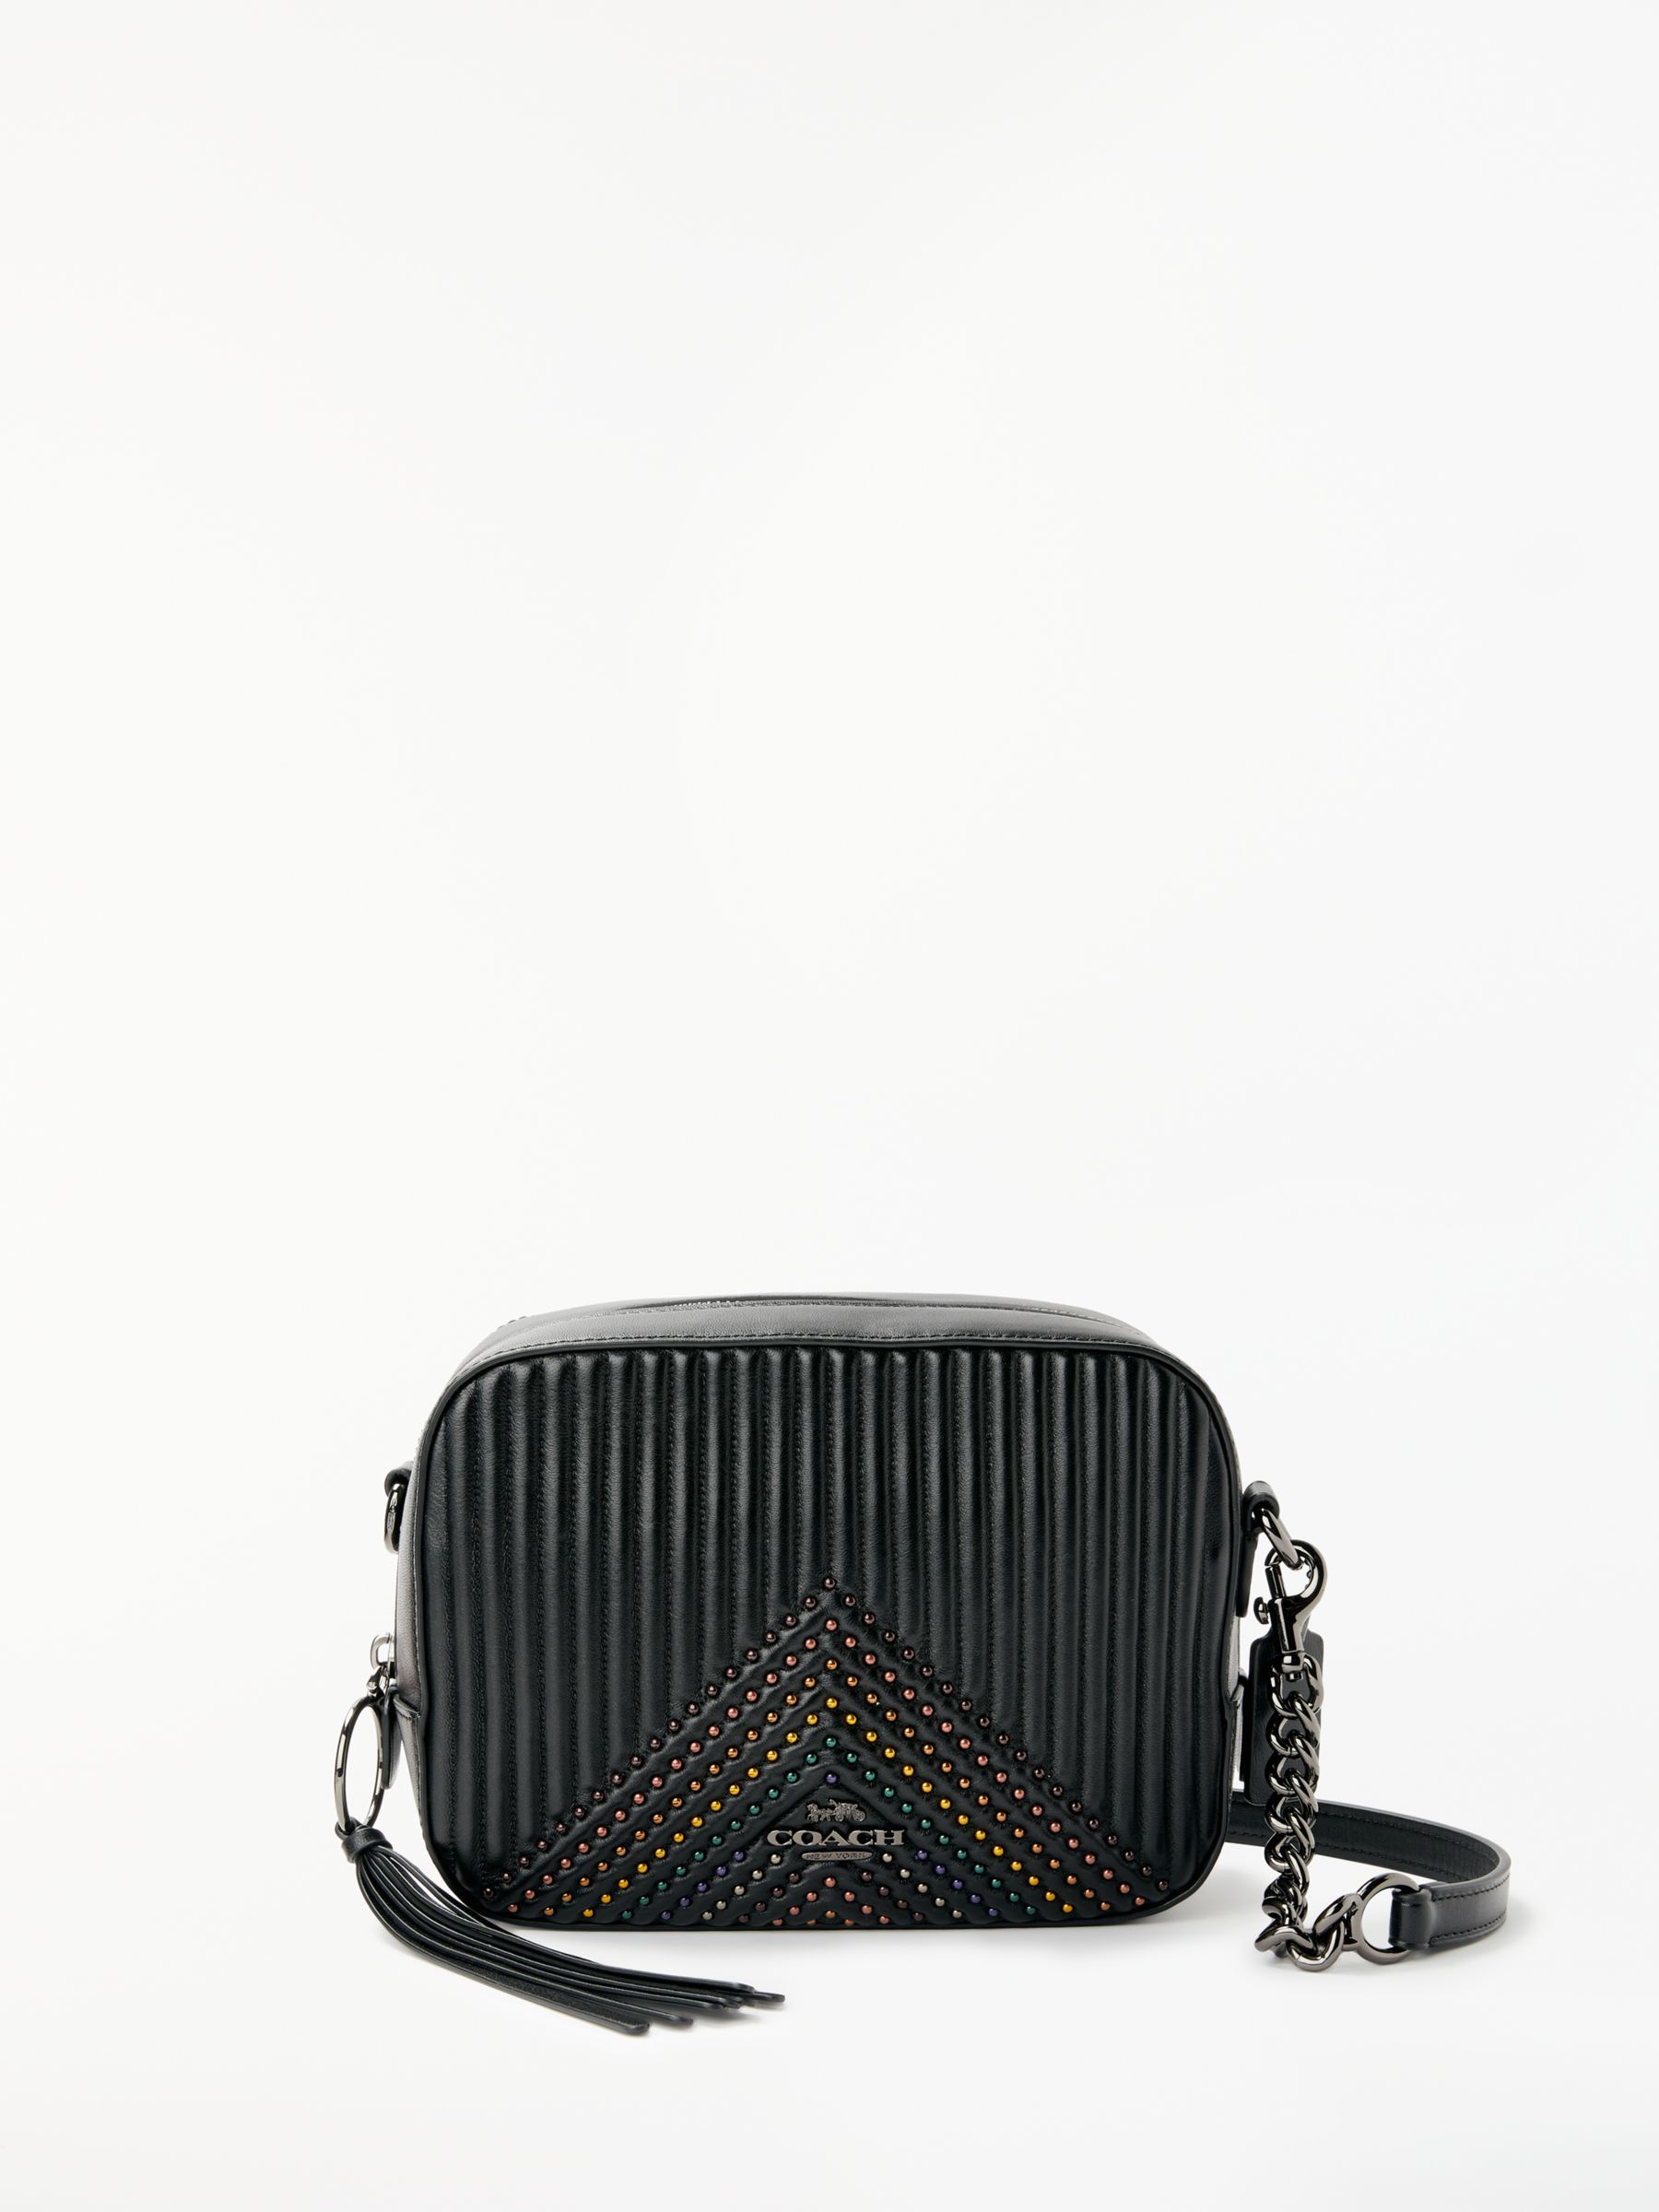 Coach Quiting Rivets Leather Camera Bag, Black/Multi at John Lewis & Partners